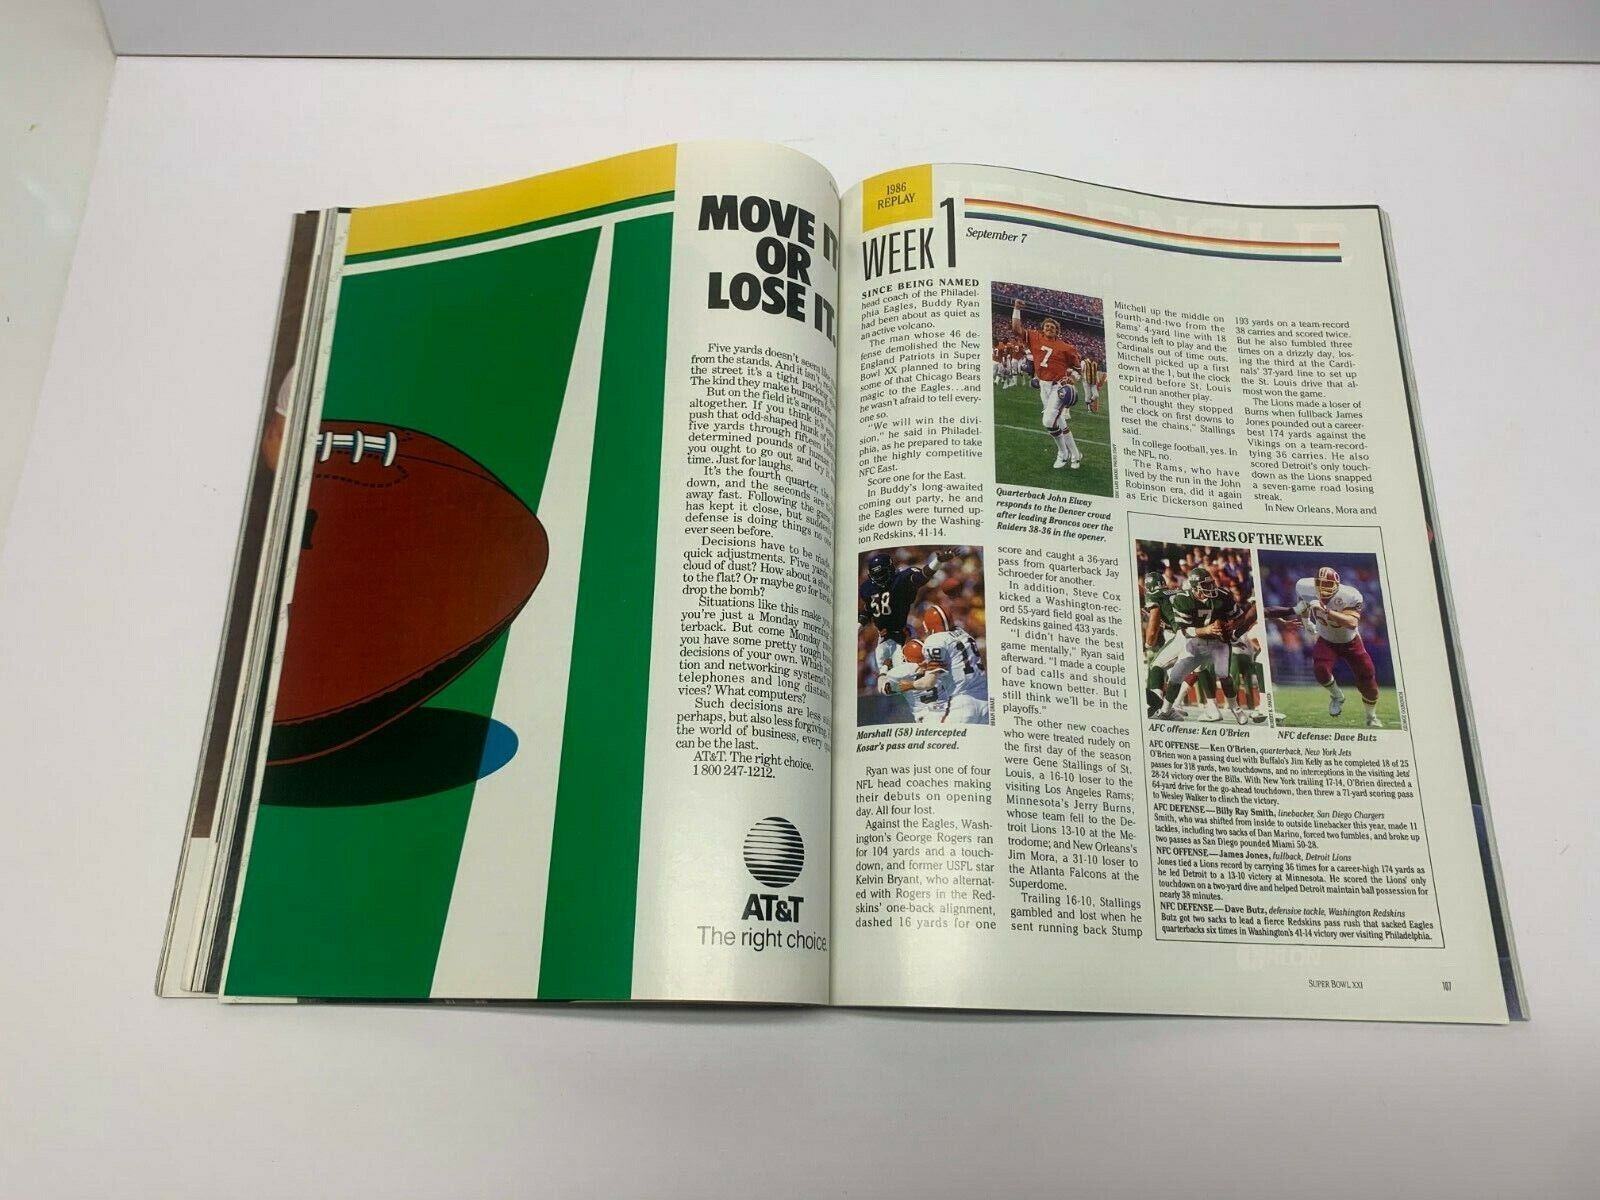 Super Bowl 21 Official Game Program 1987 Broncos vs Giants in ex condition